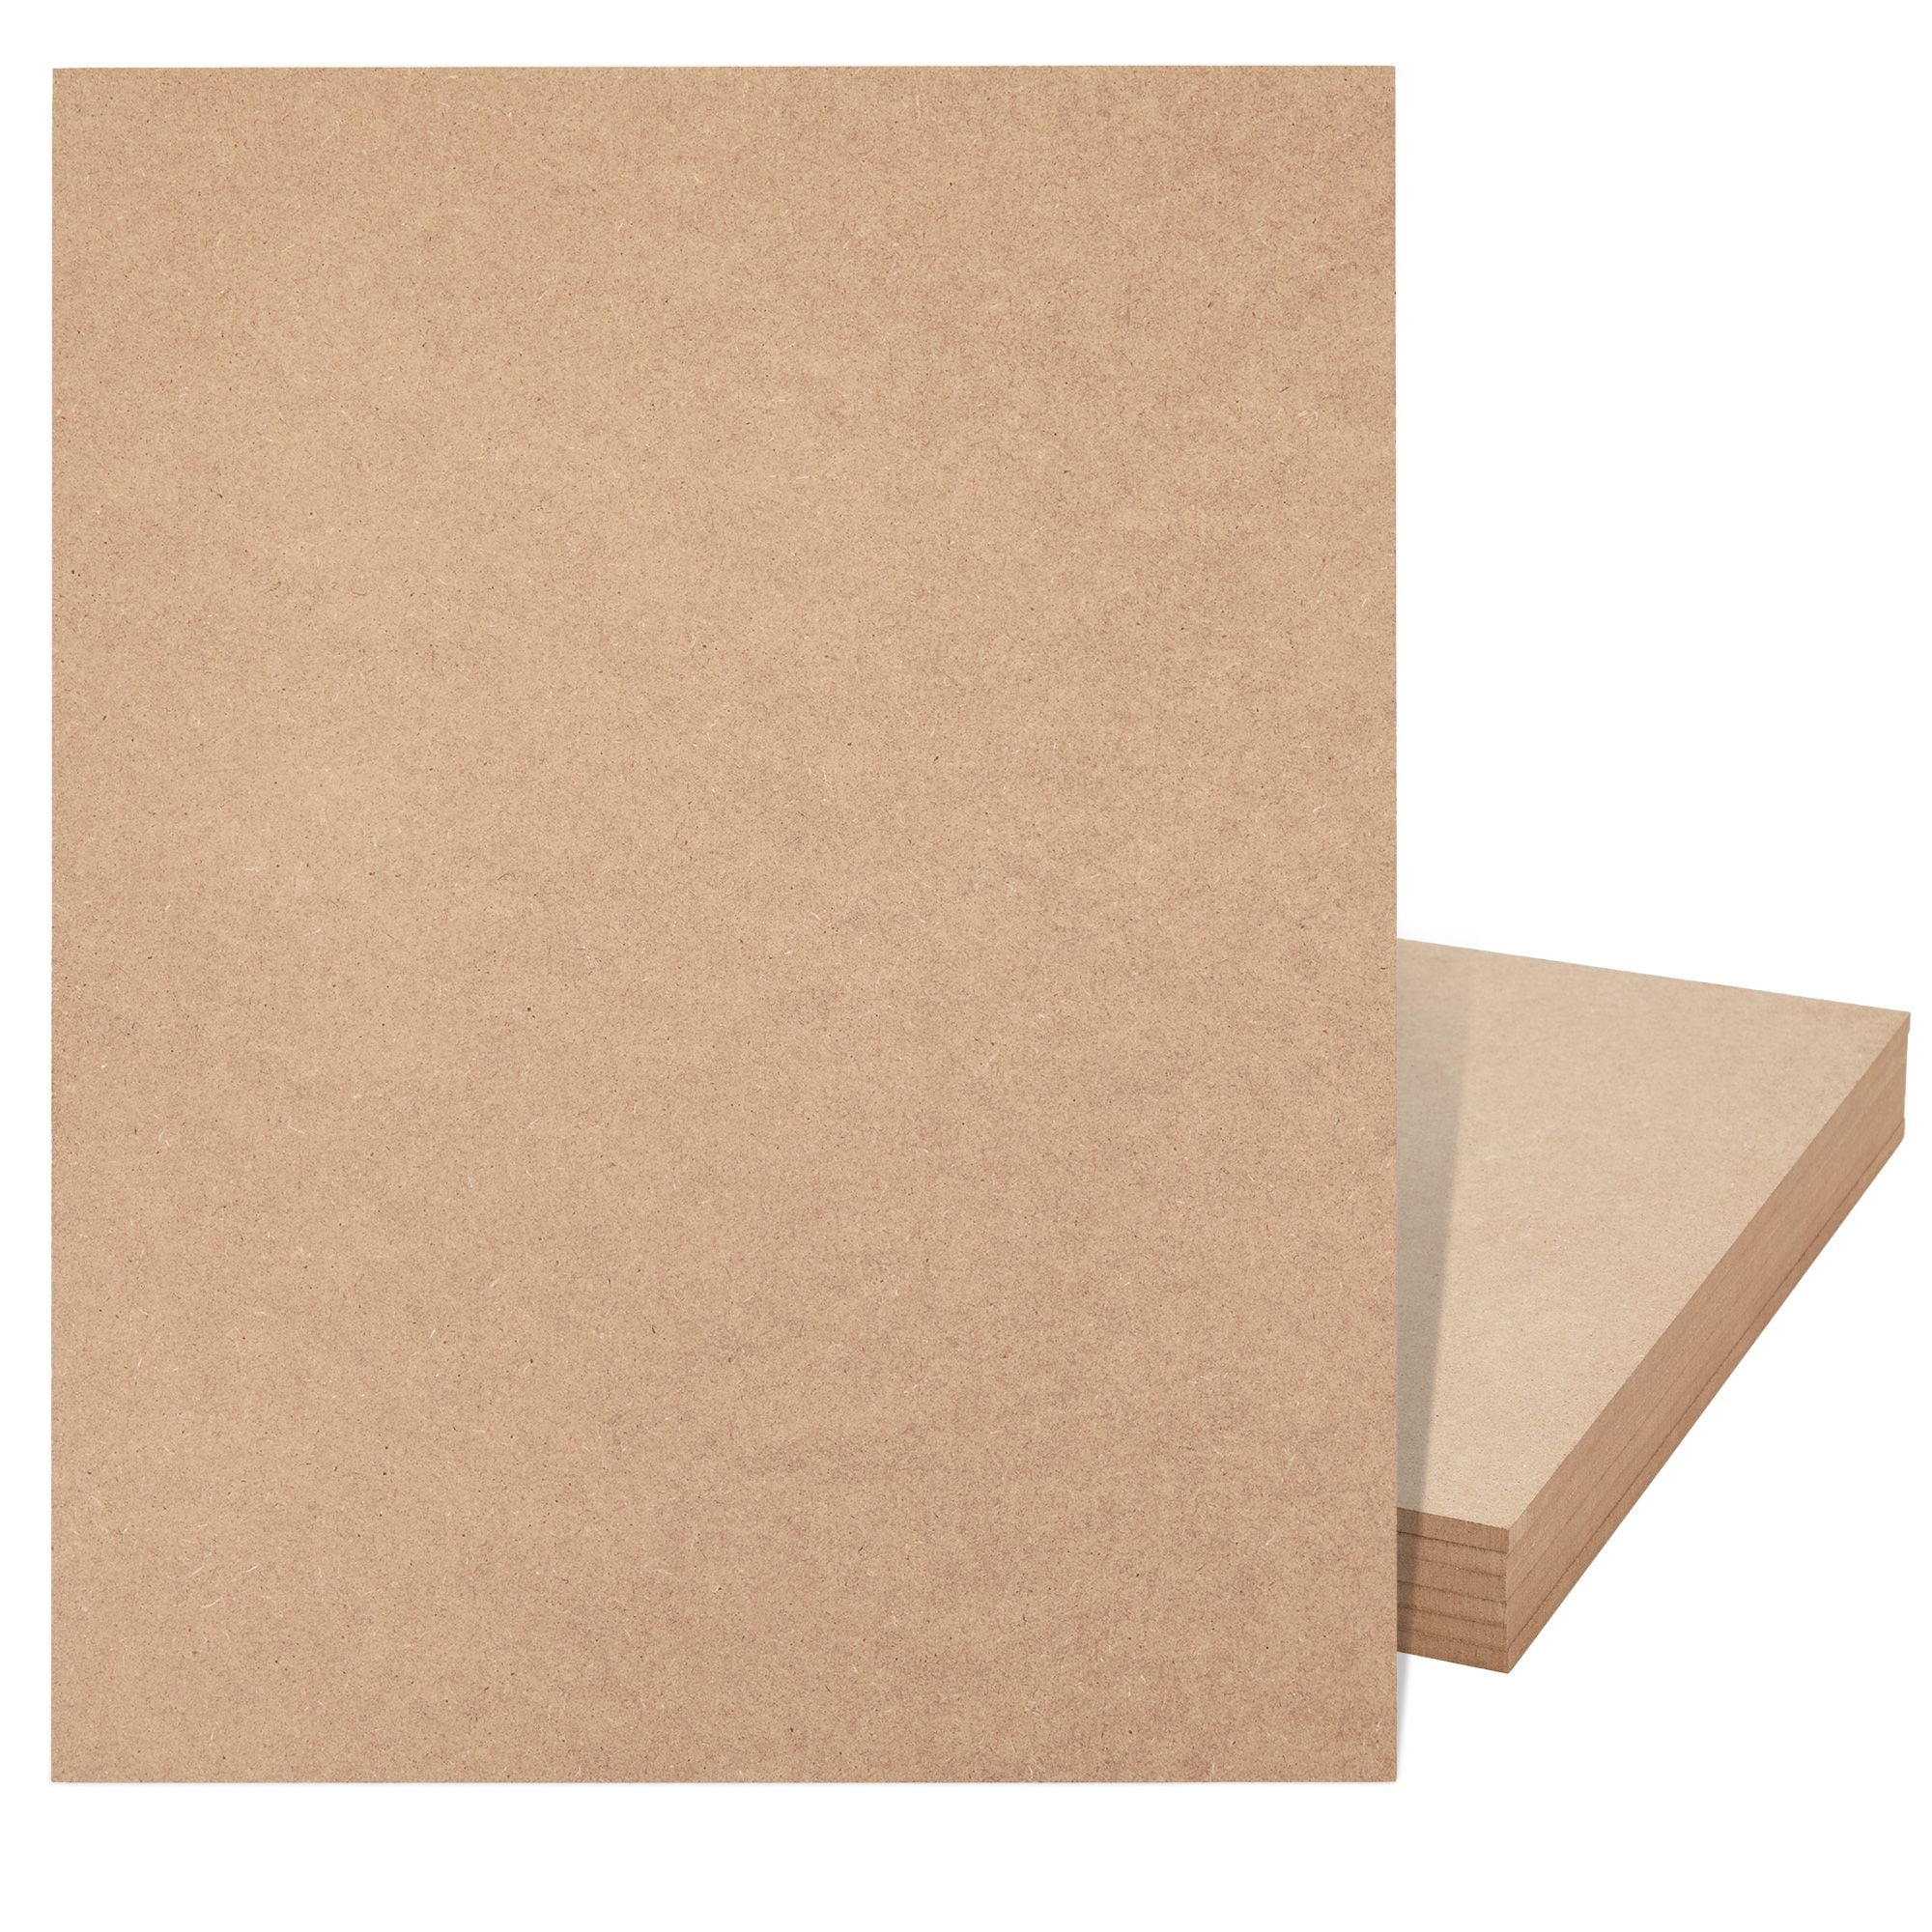 Chipboard or MDF: differences